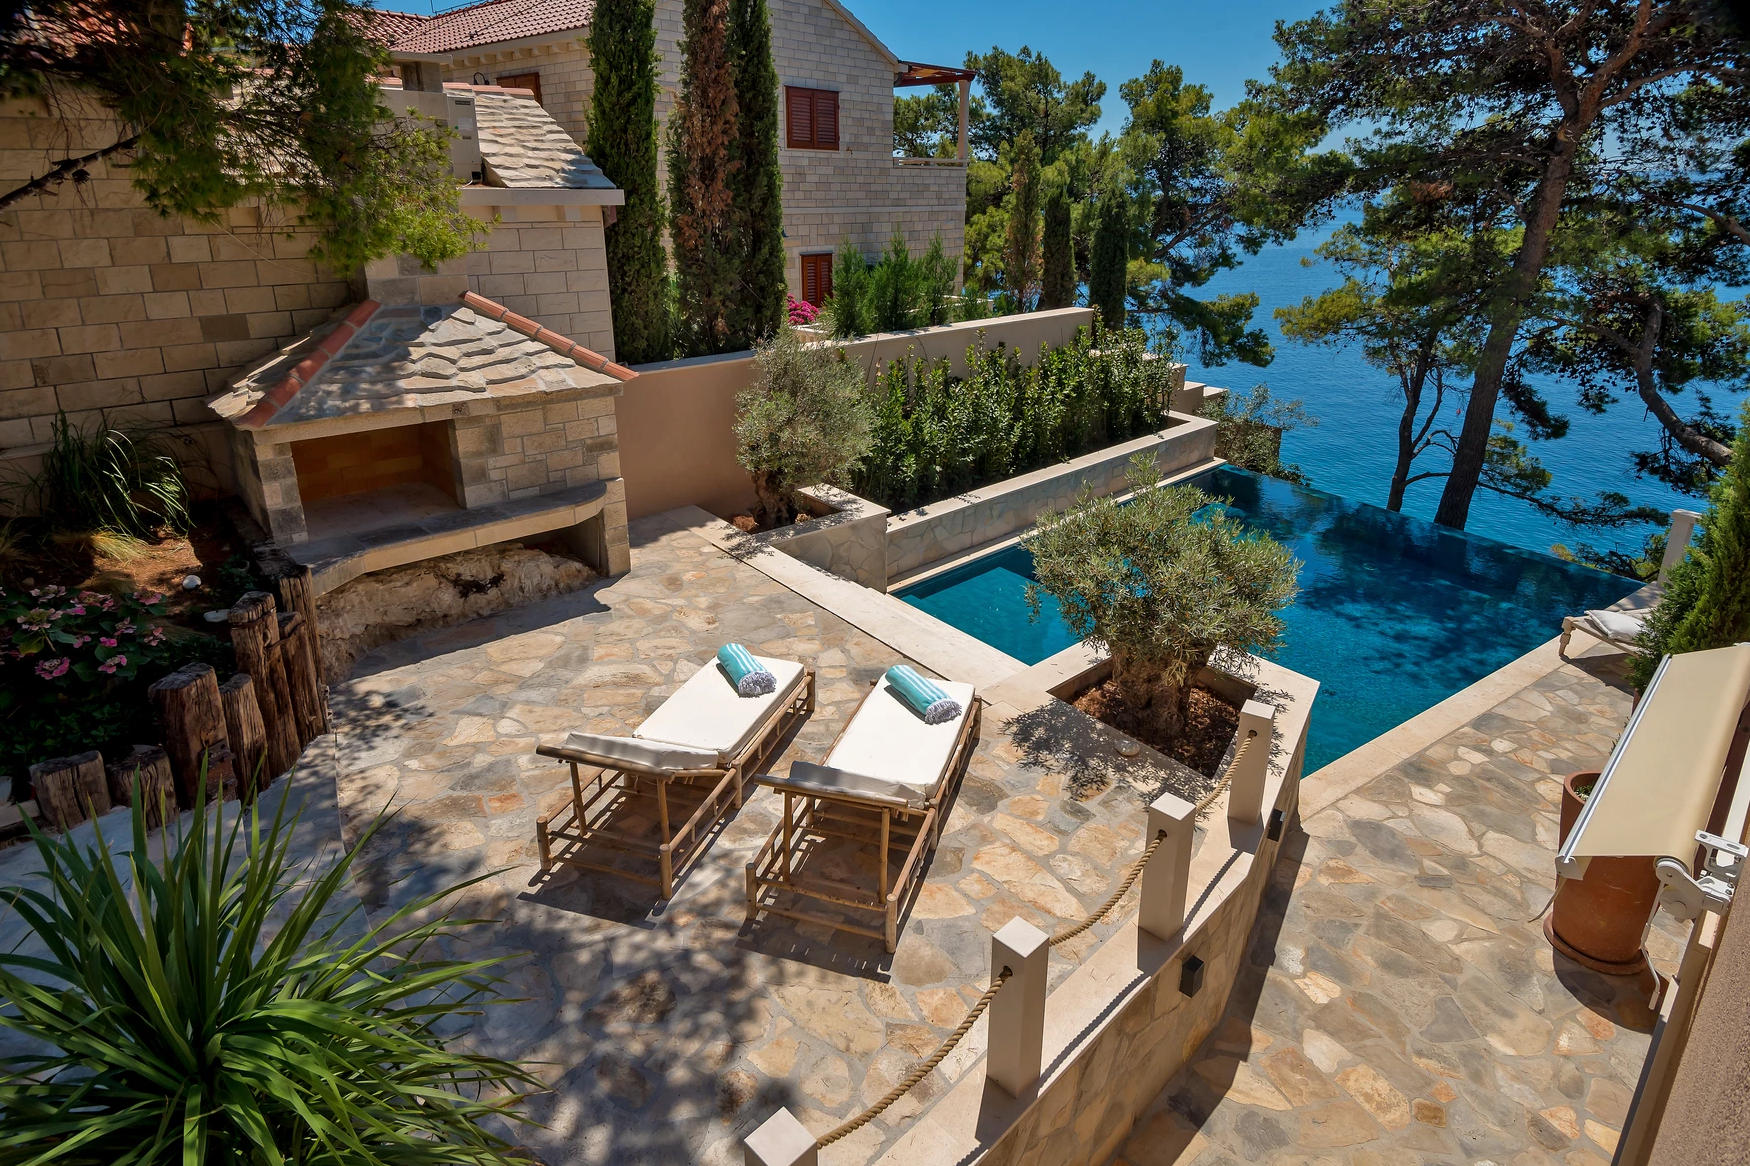 Maison Mala's terrace with loungers and pool